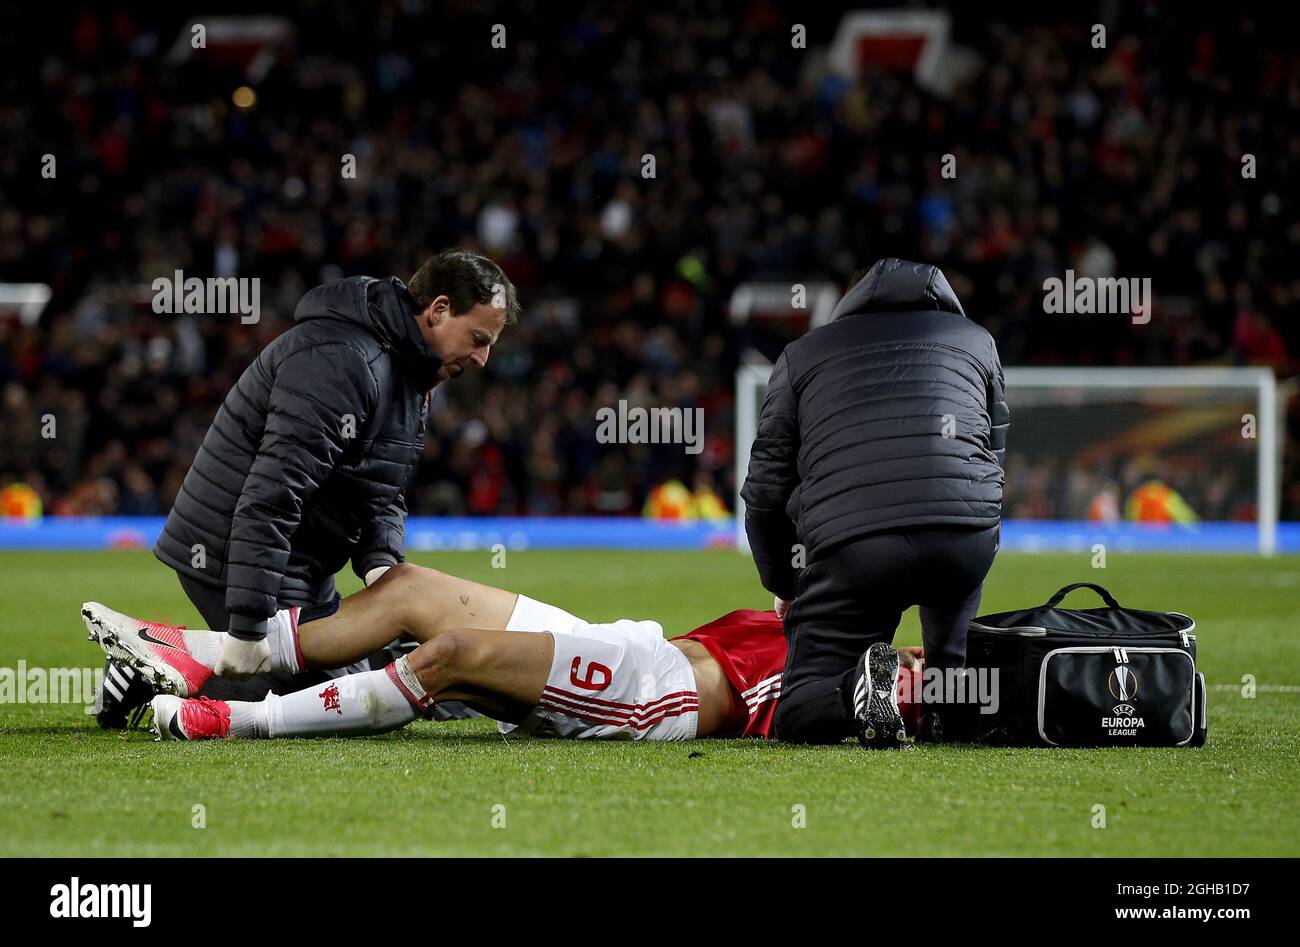 Zlatan Ibrahimovic of Manchester United receives treatment for an injury  during the UEFA Europa League Quarter Final 2nd Leg match at Old Trafford,  Manchester. Picture date: April 20th, 2017. Pic credit should